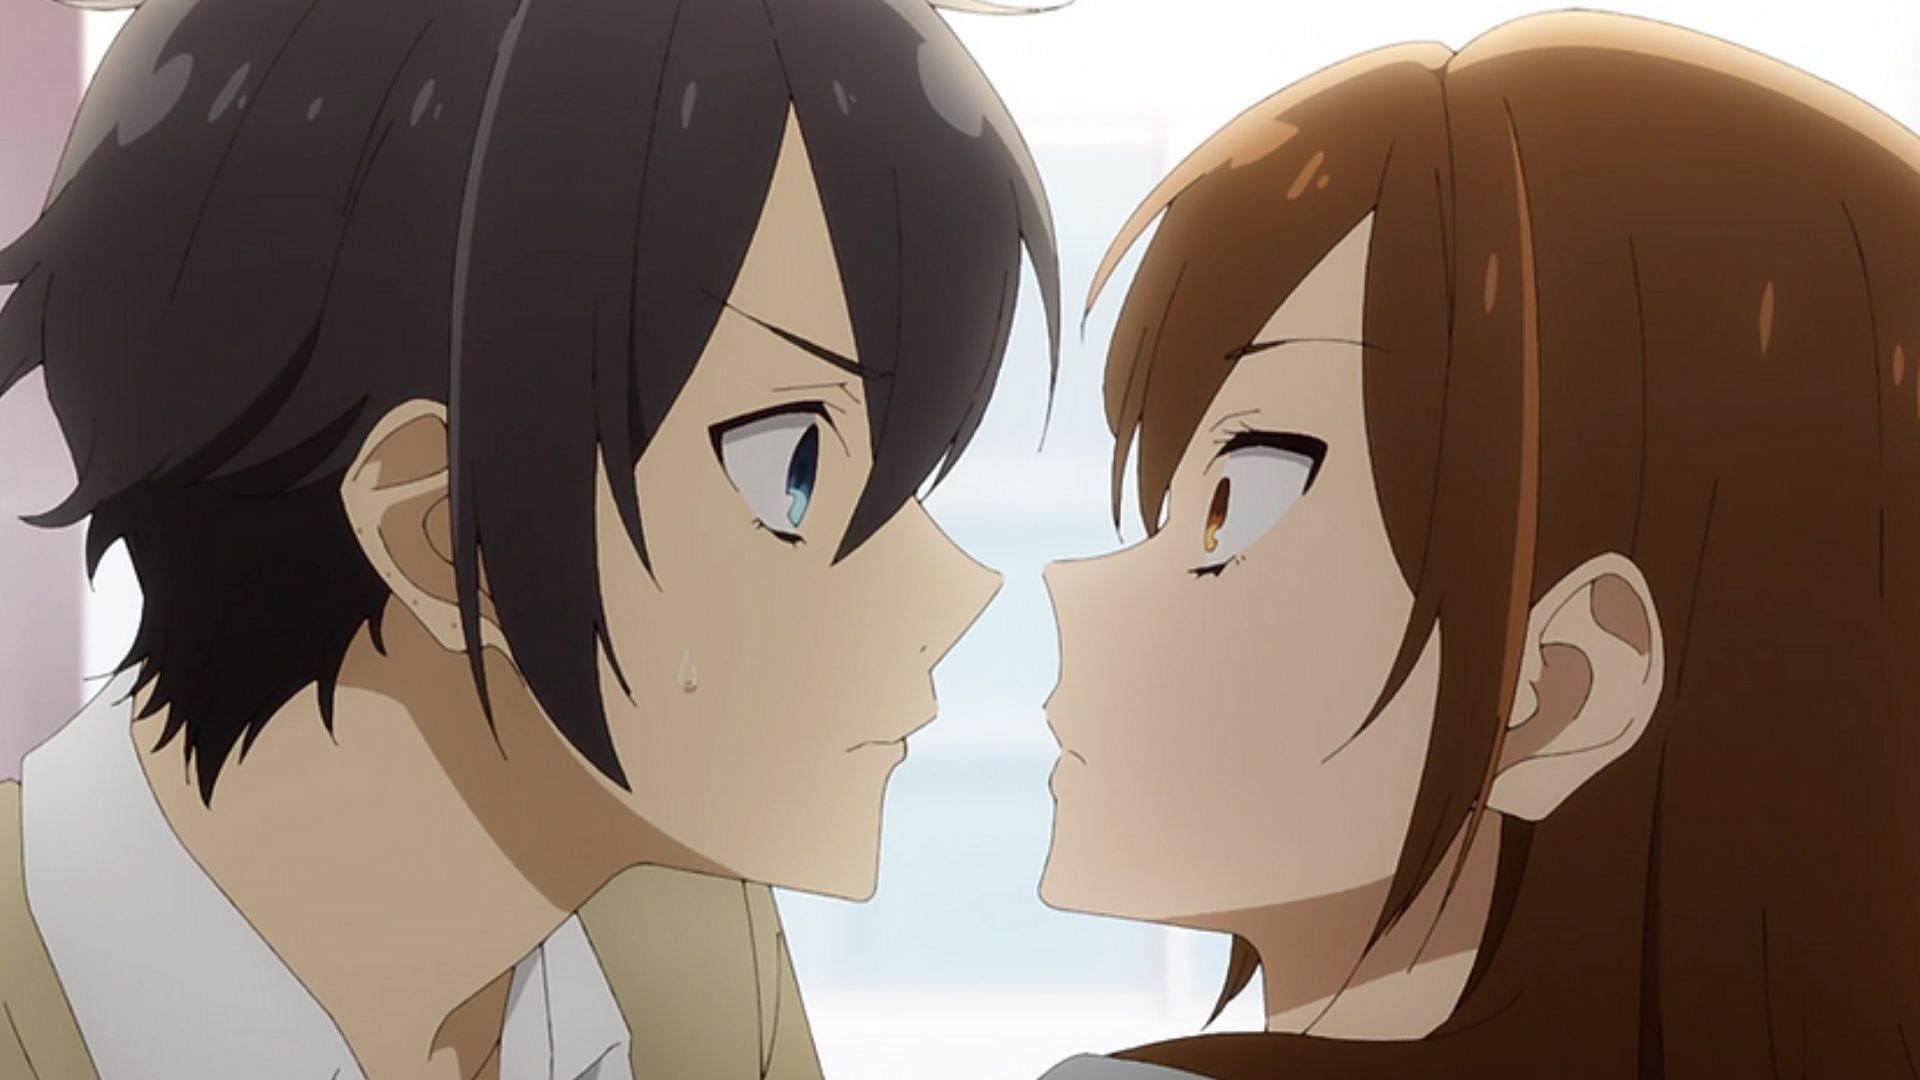 Horimiya New Anime Adaptation Confirmed: What will be different this time?